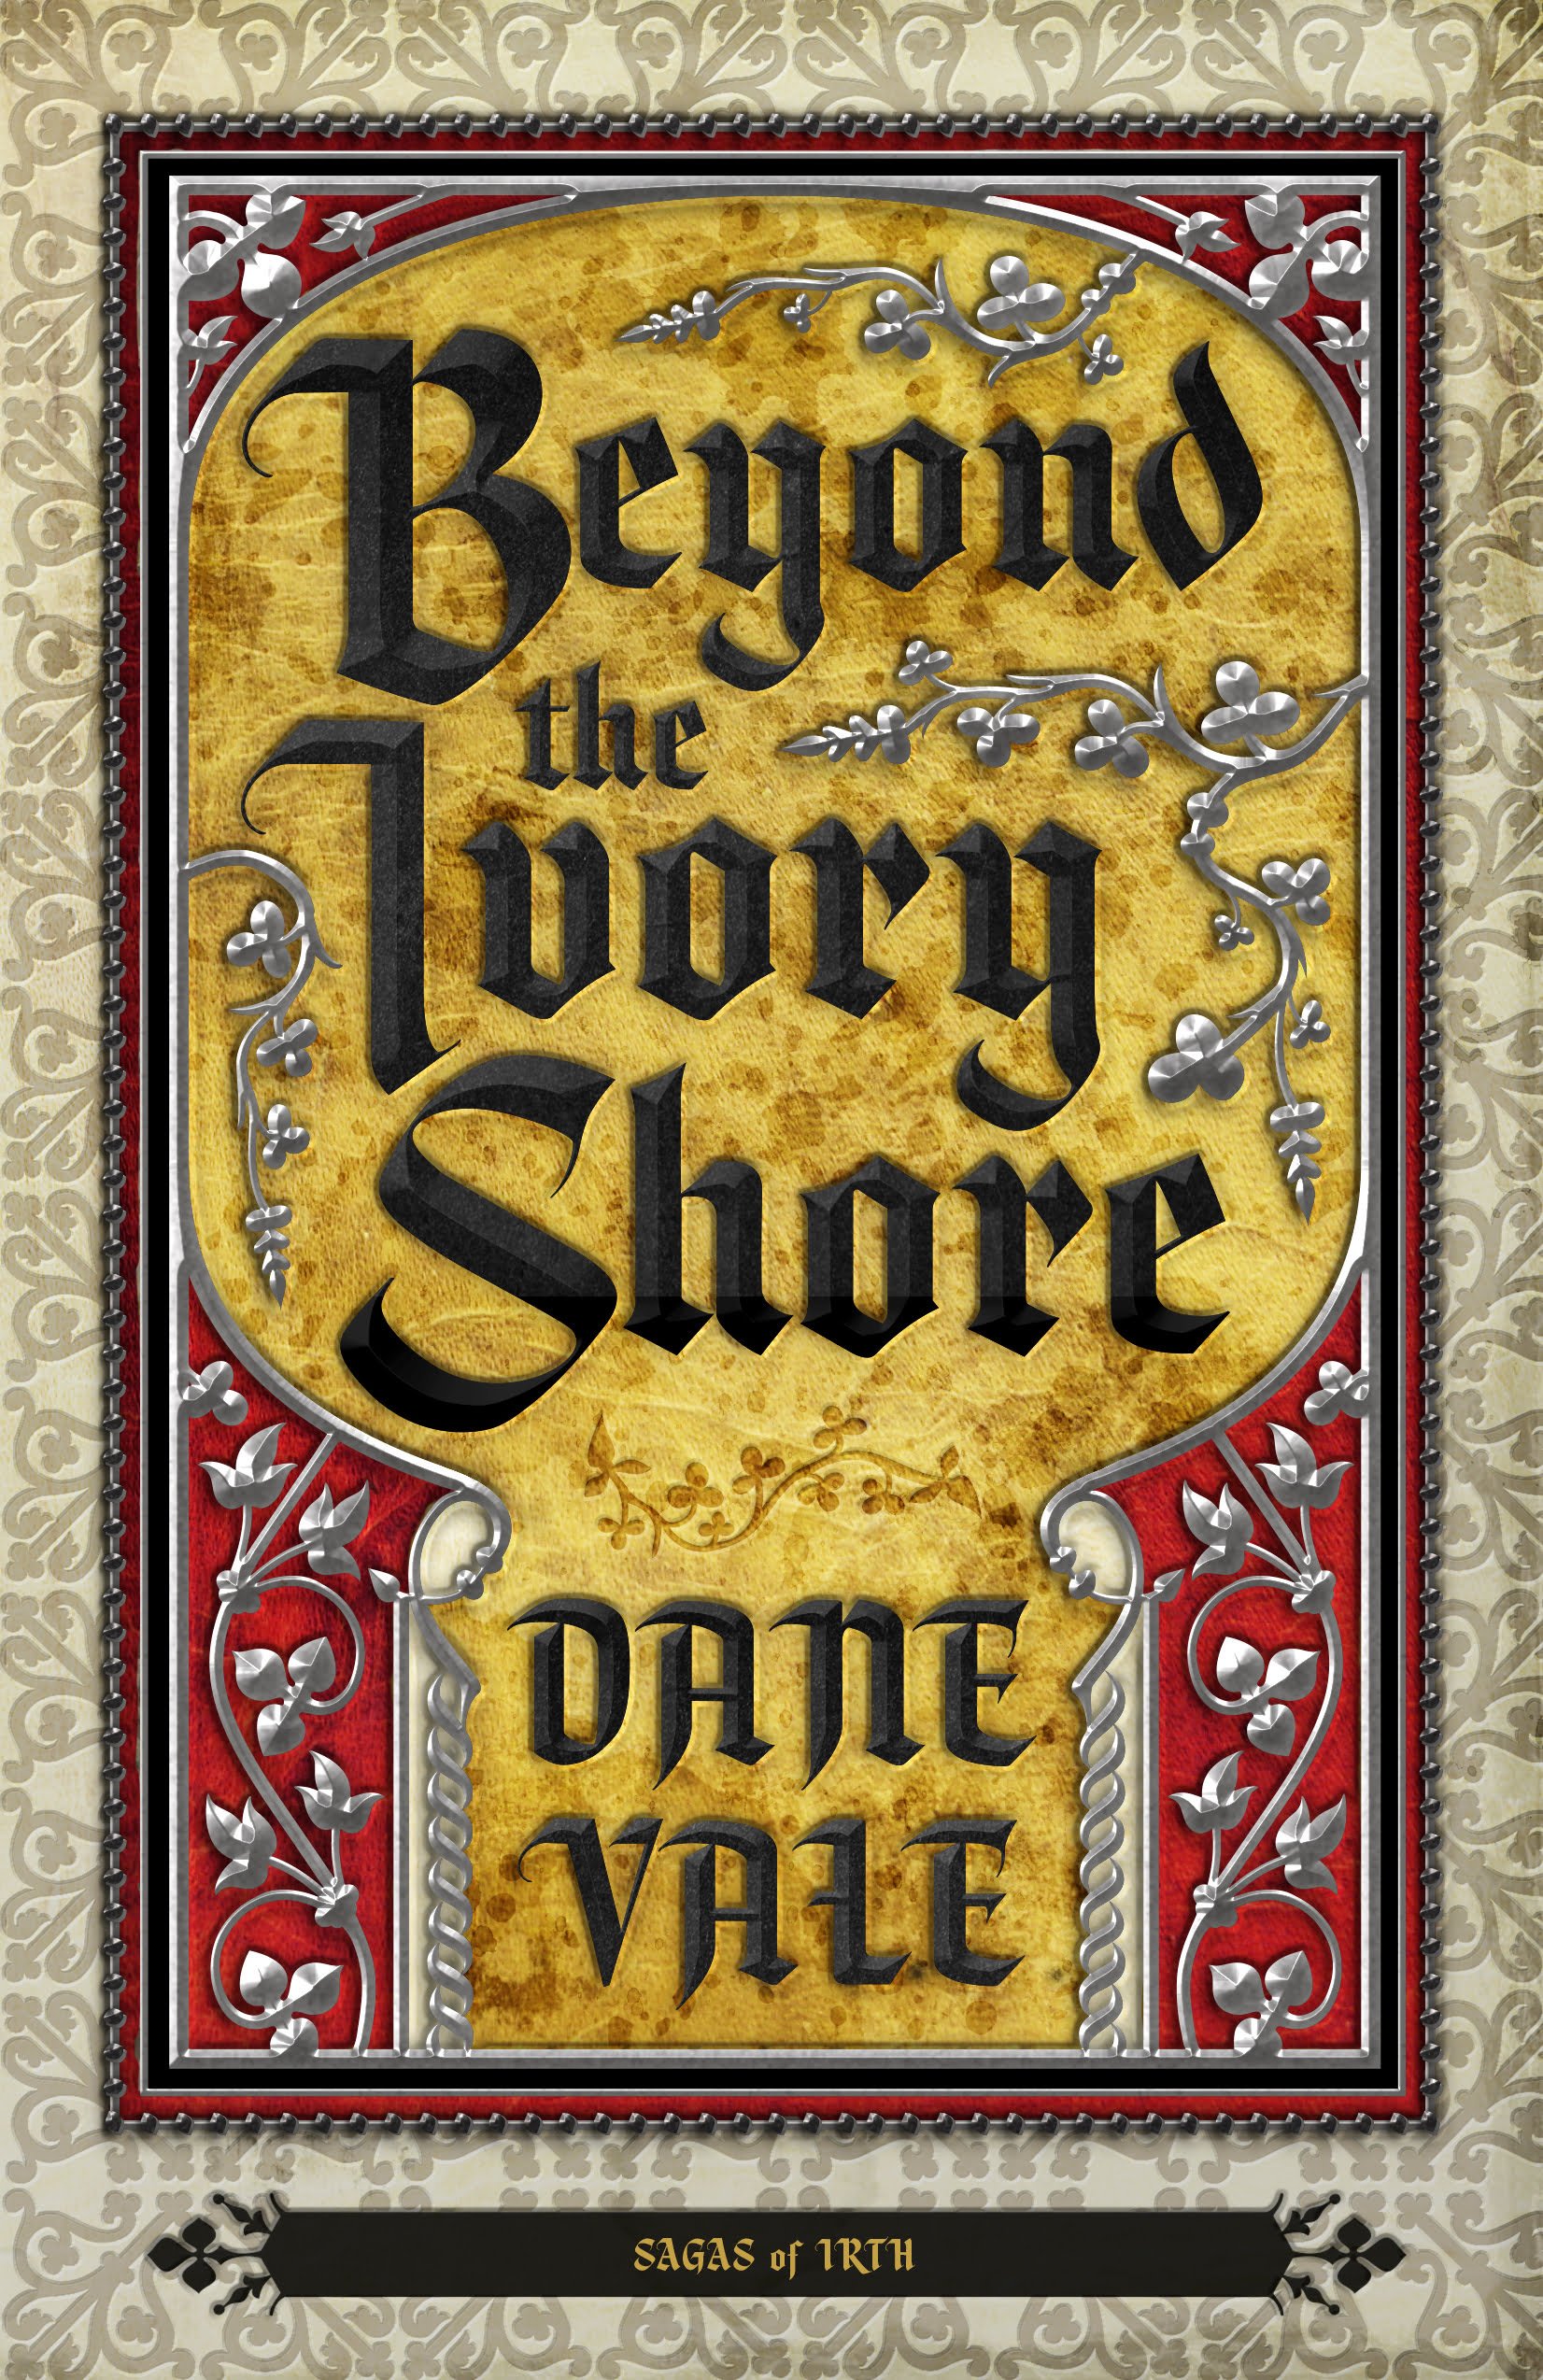 Beyond the Ivory Shore